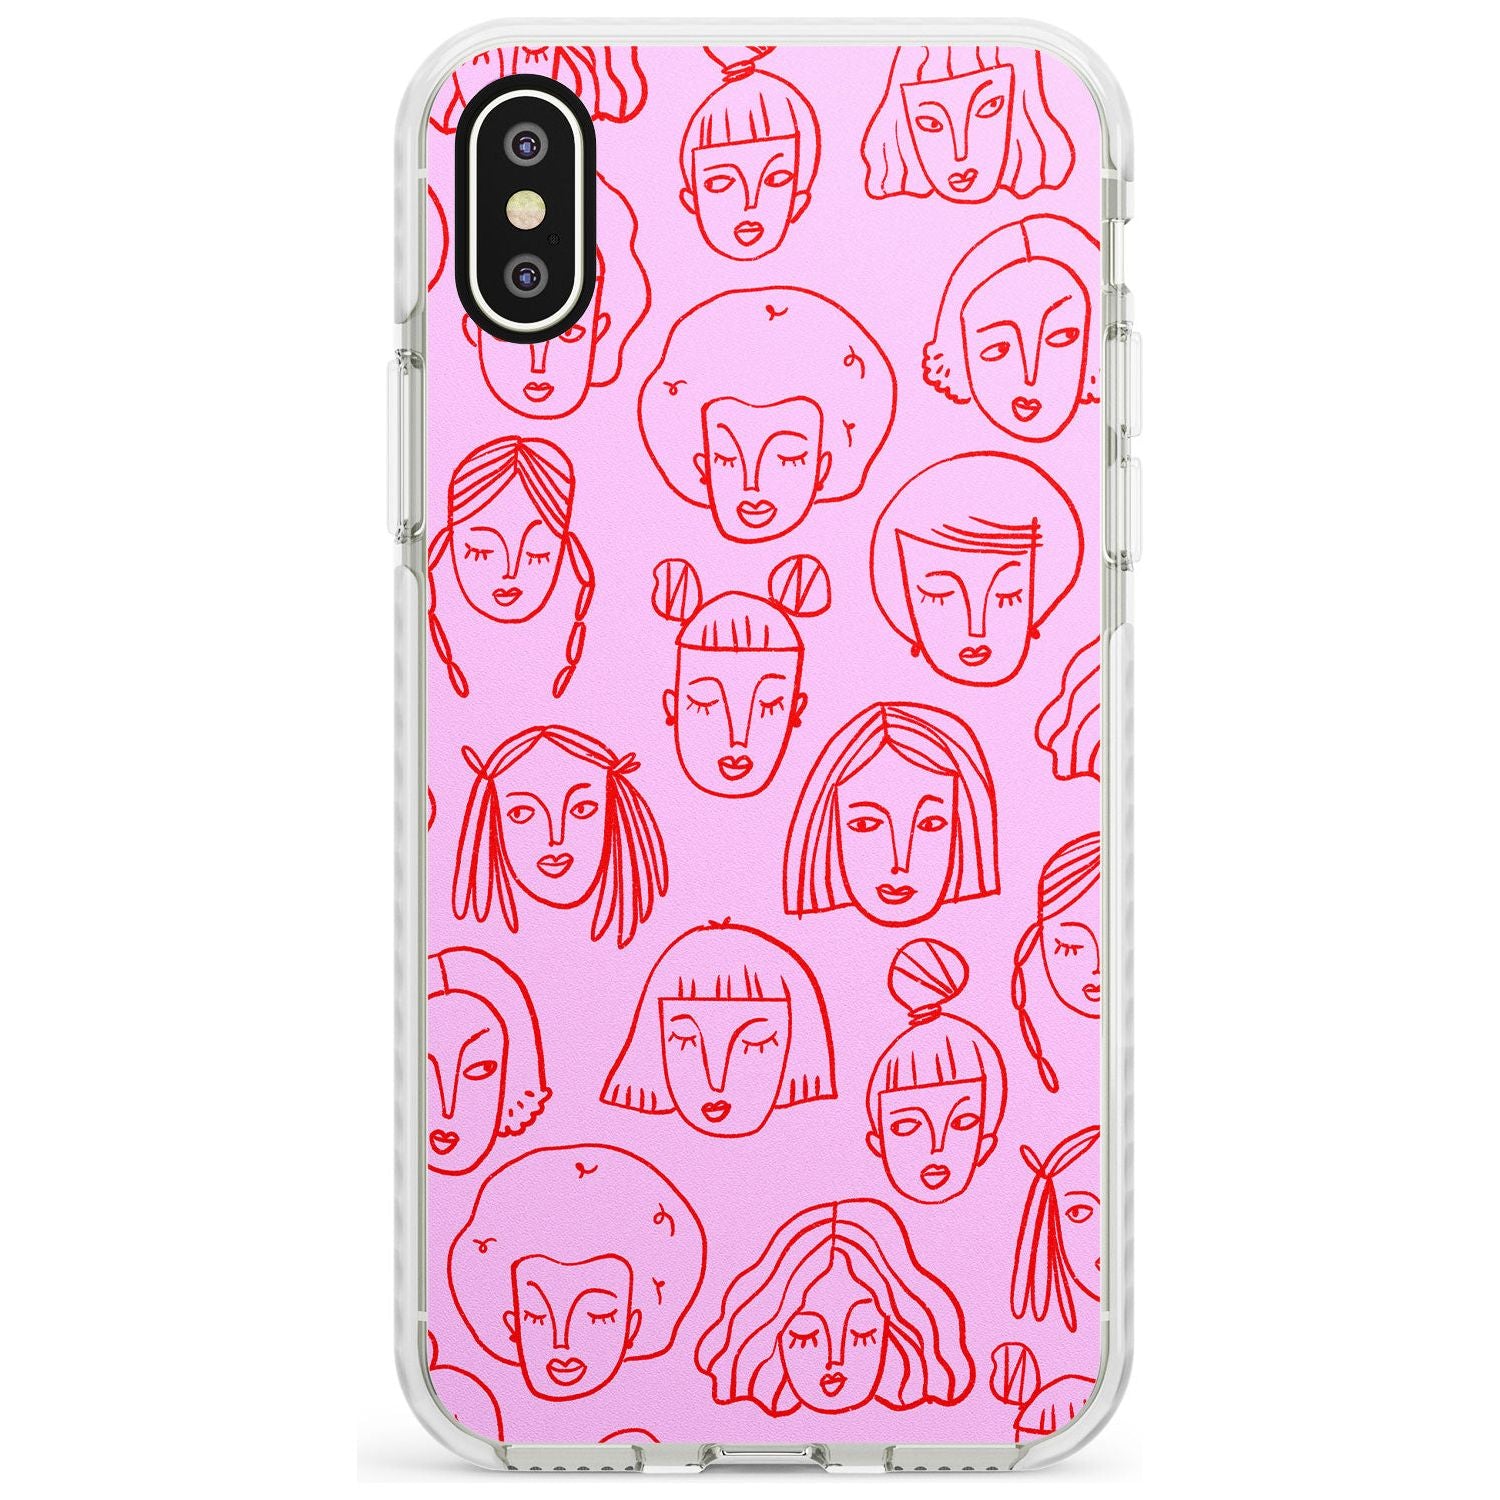 Girl Portrait Doodles in Pink & Red Impact Phone Case for iPhone X XS Max XR